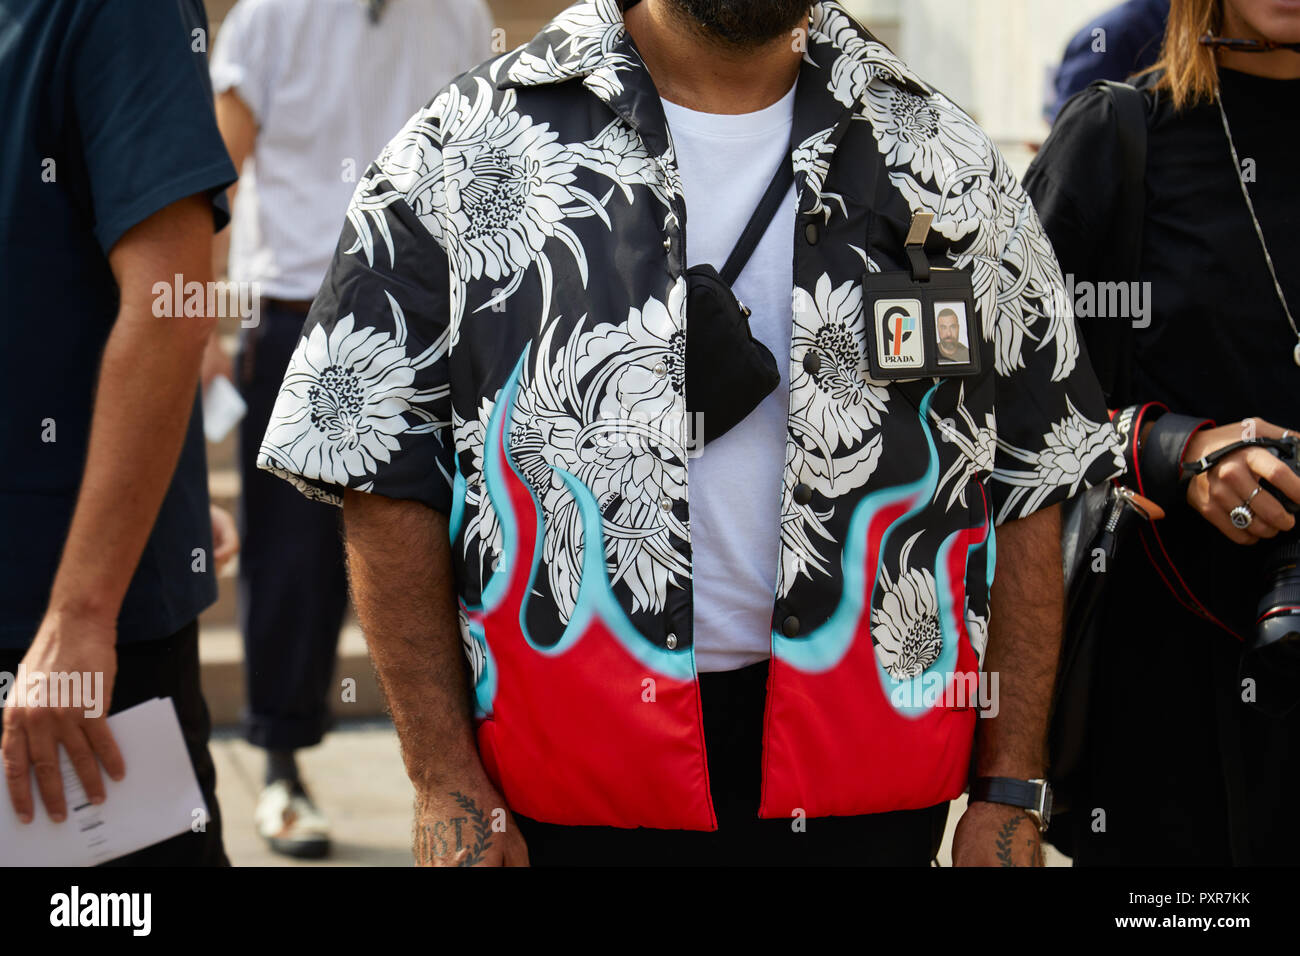 MILAN, ITALY - SEPTEMBER 22, 2018: Man with Prada jacket with floral design in black and white and red flames before Gabriele Colangelo fashion show,  Stock Photo